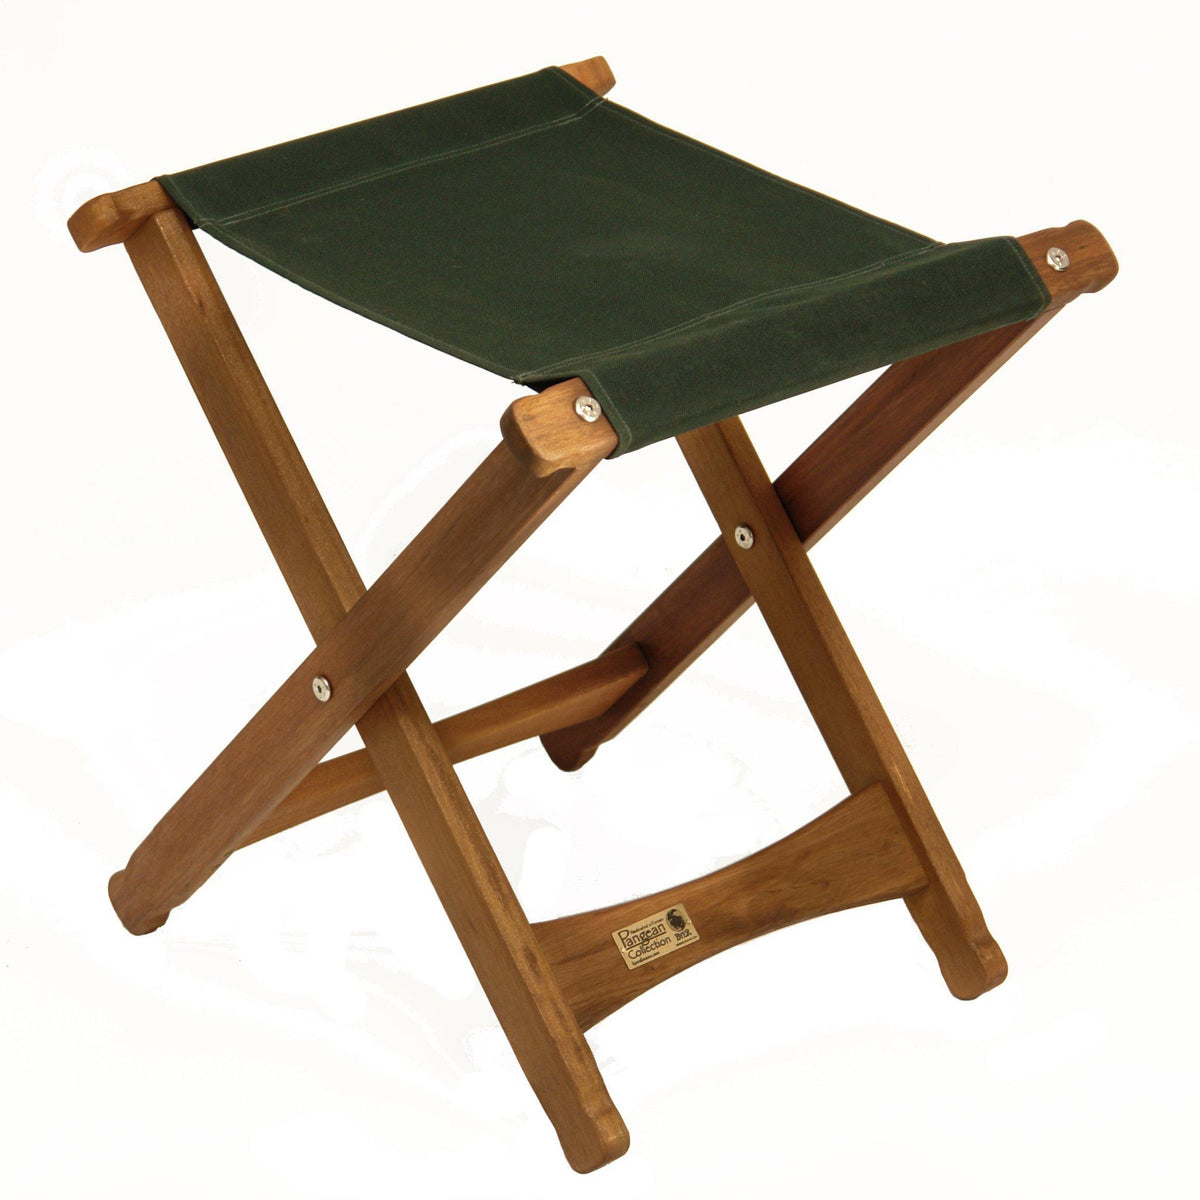 Pangean Folding Stool, Forest Green, from Byer of Maine